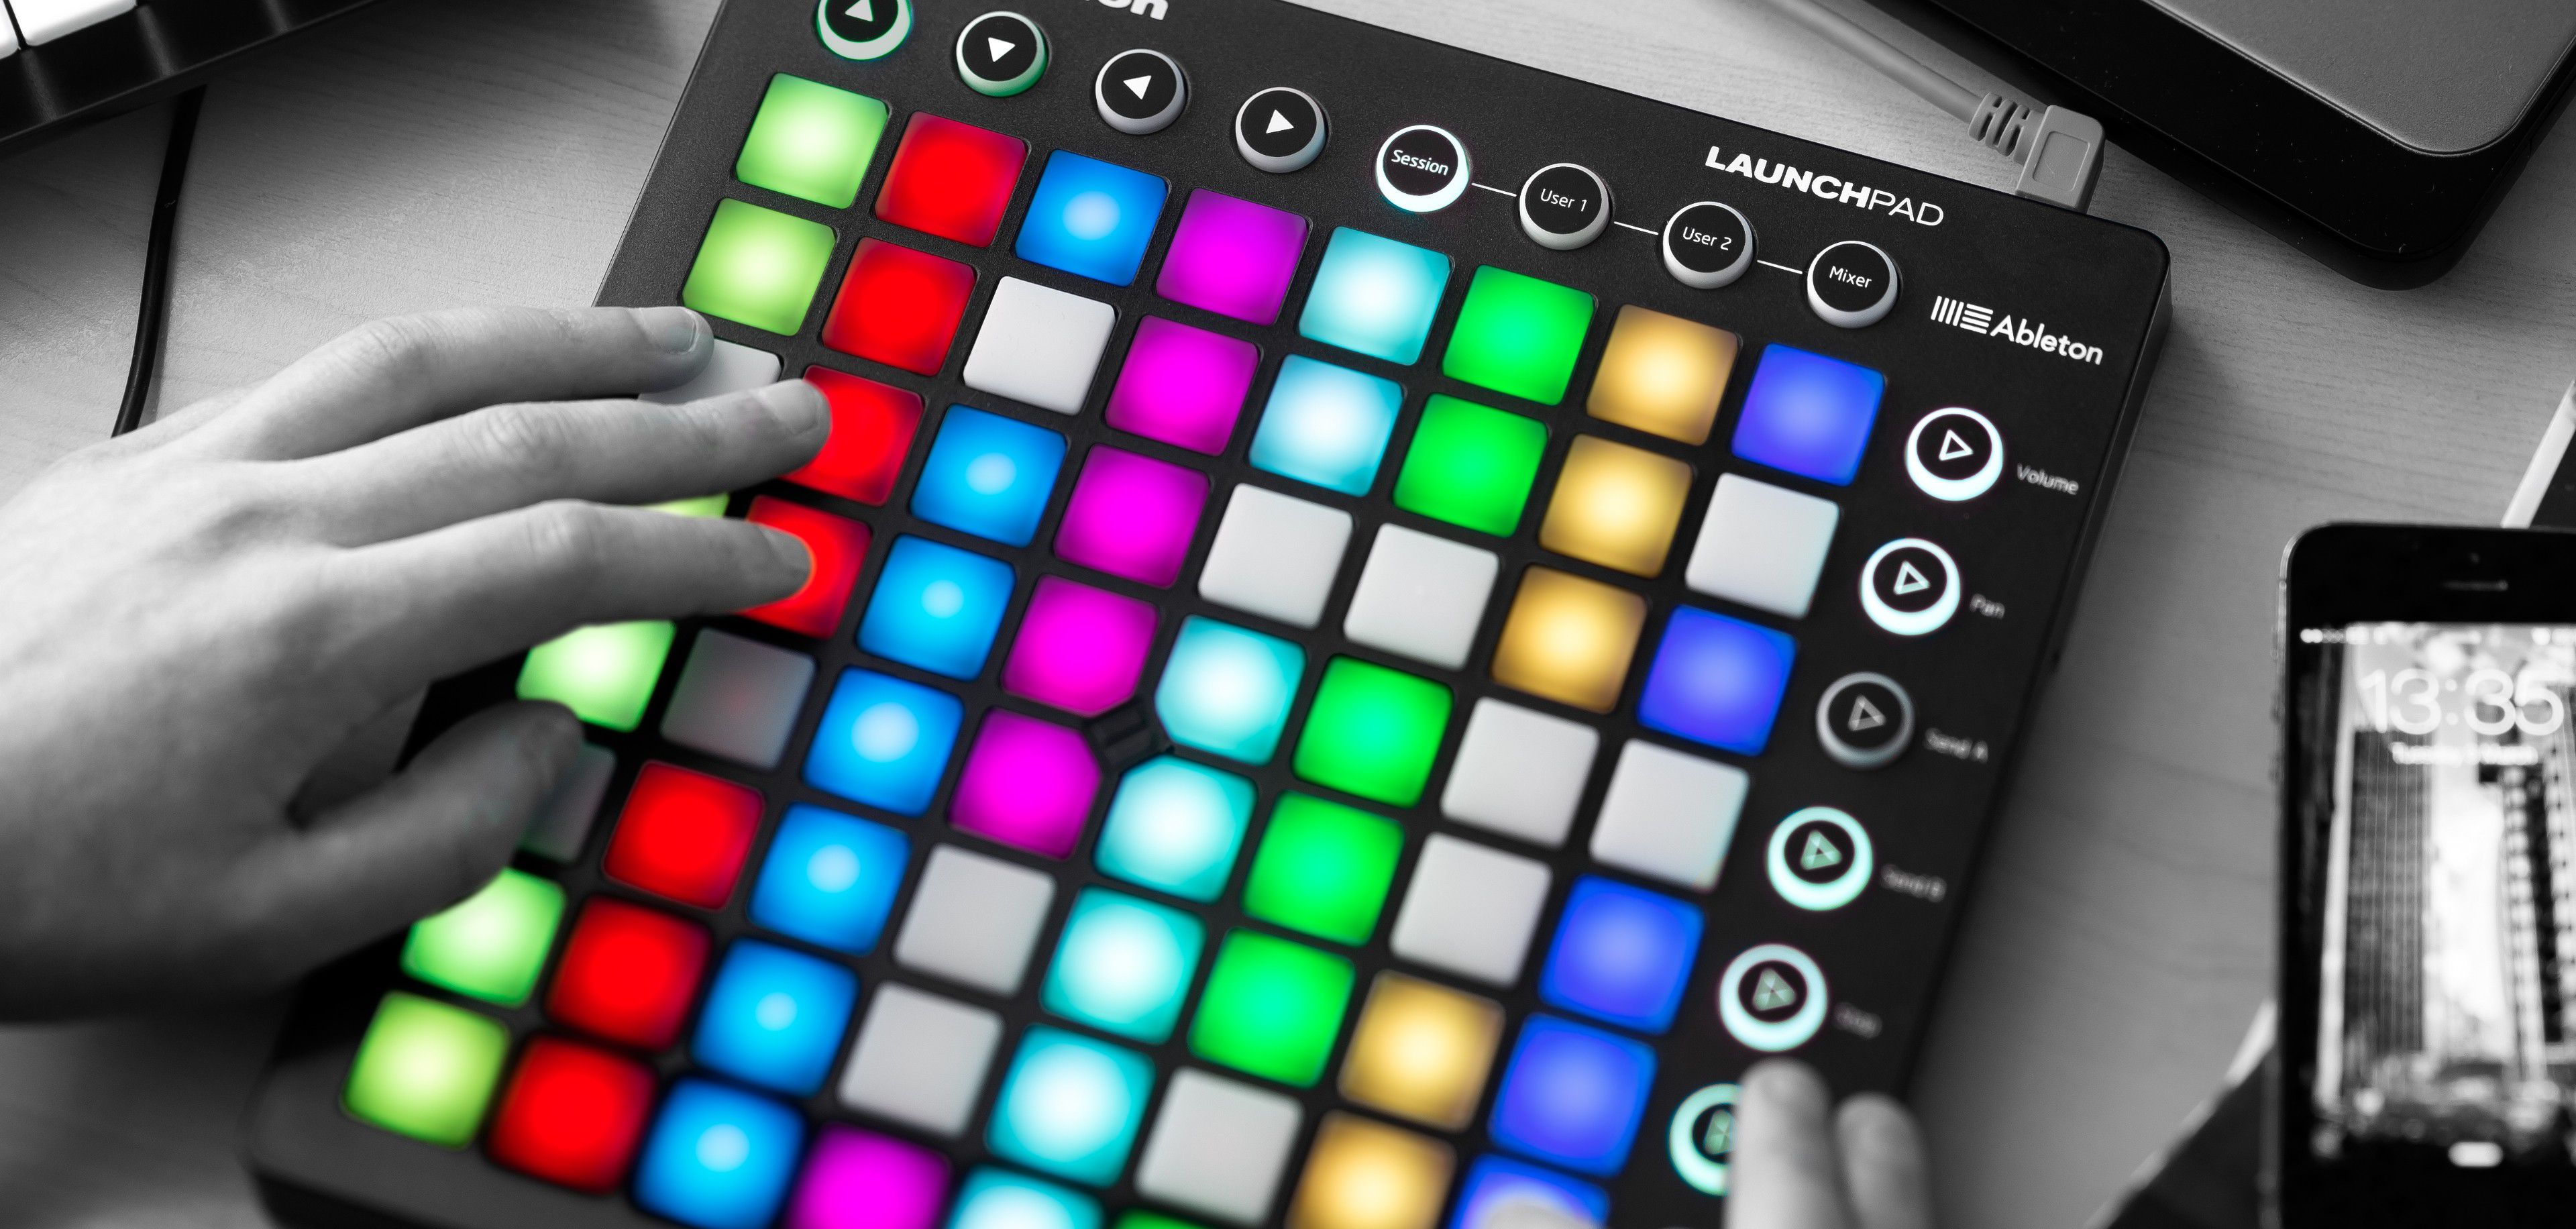 Podcasting Tips: Converting a Novation Launchpad to a Soundboard